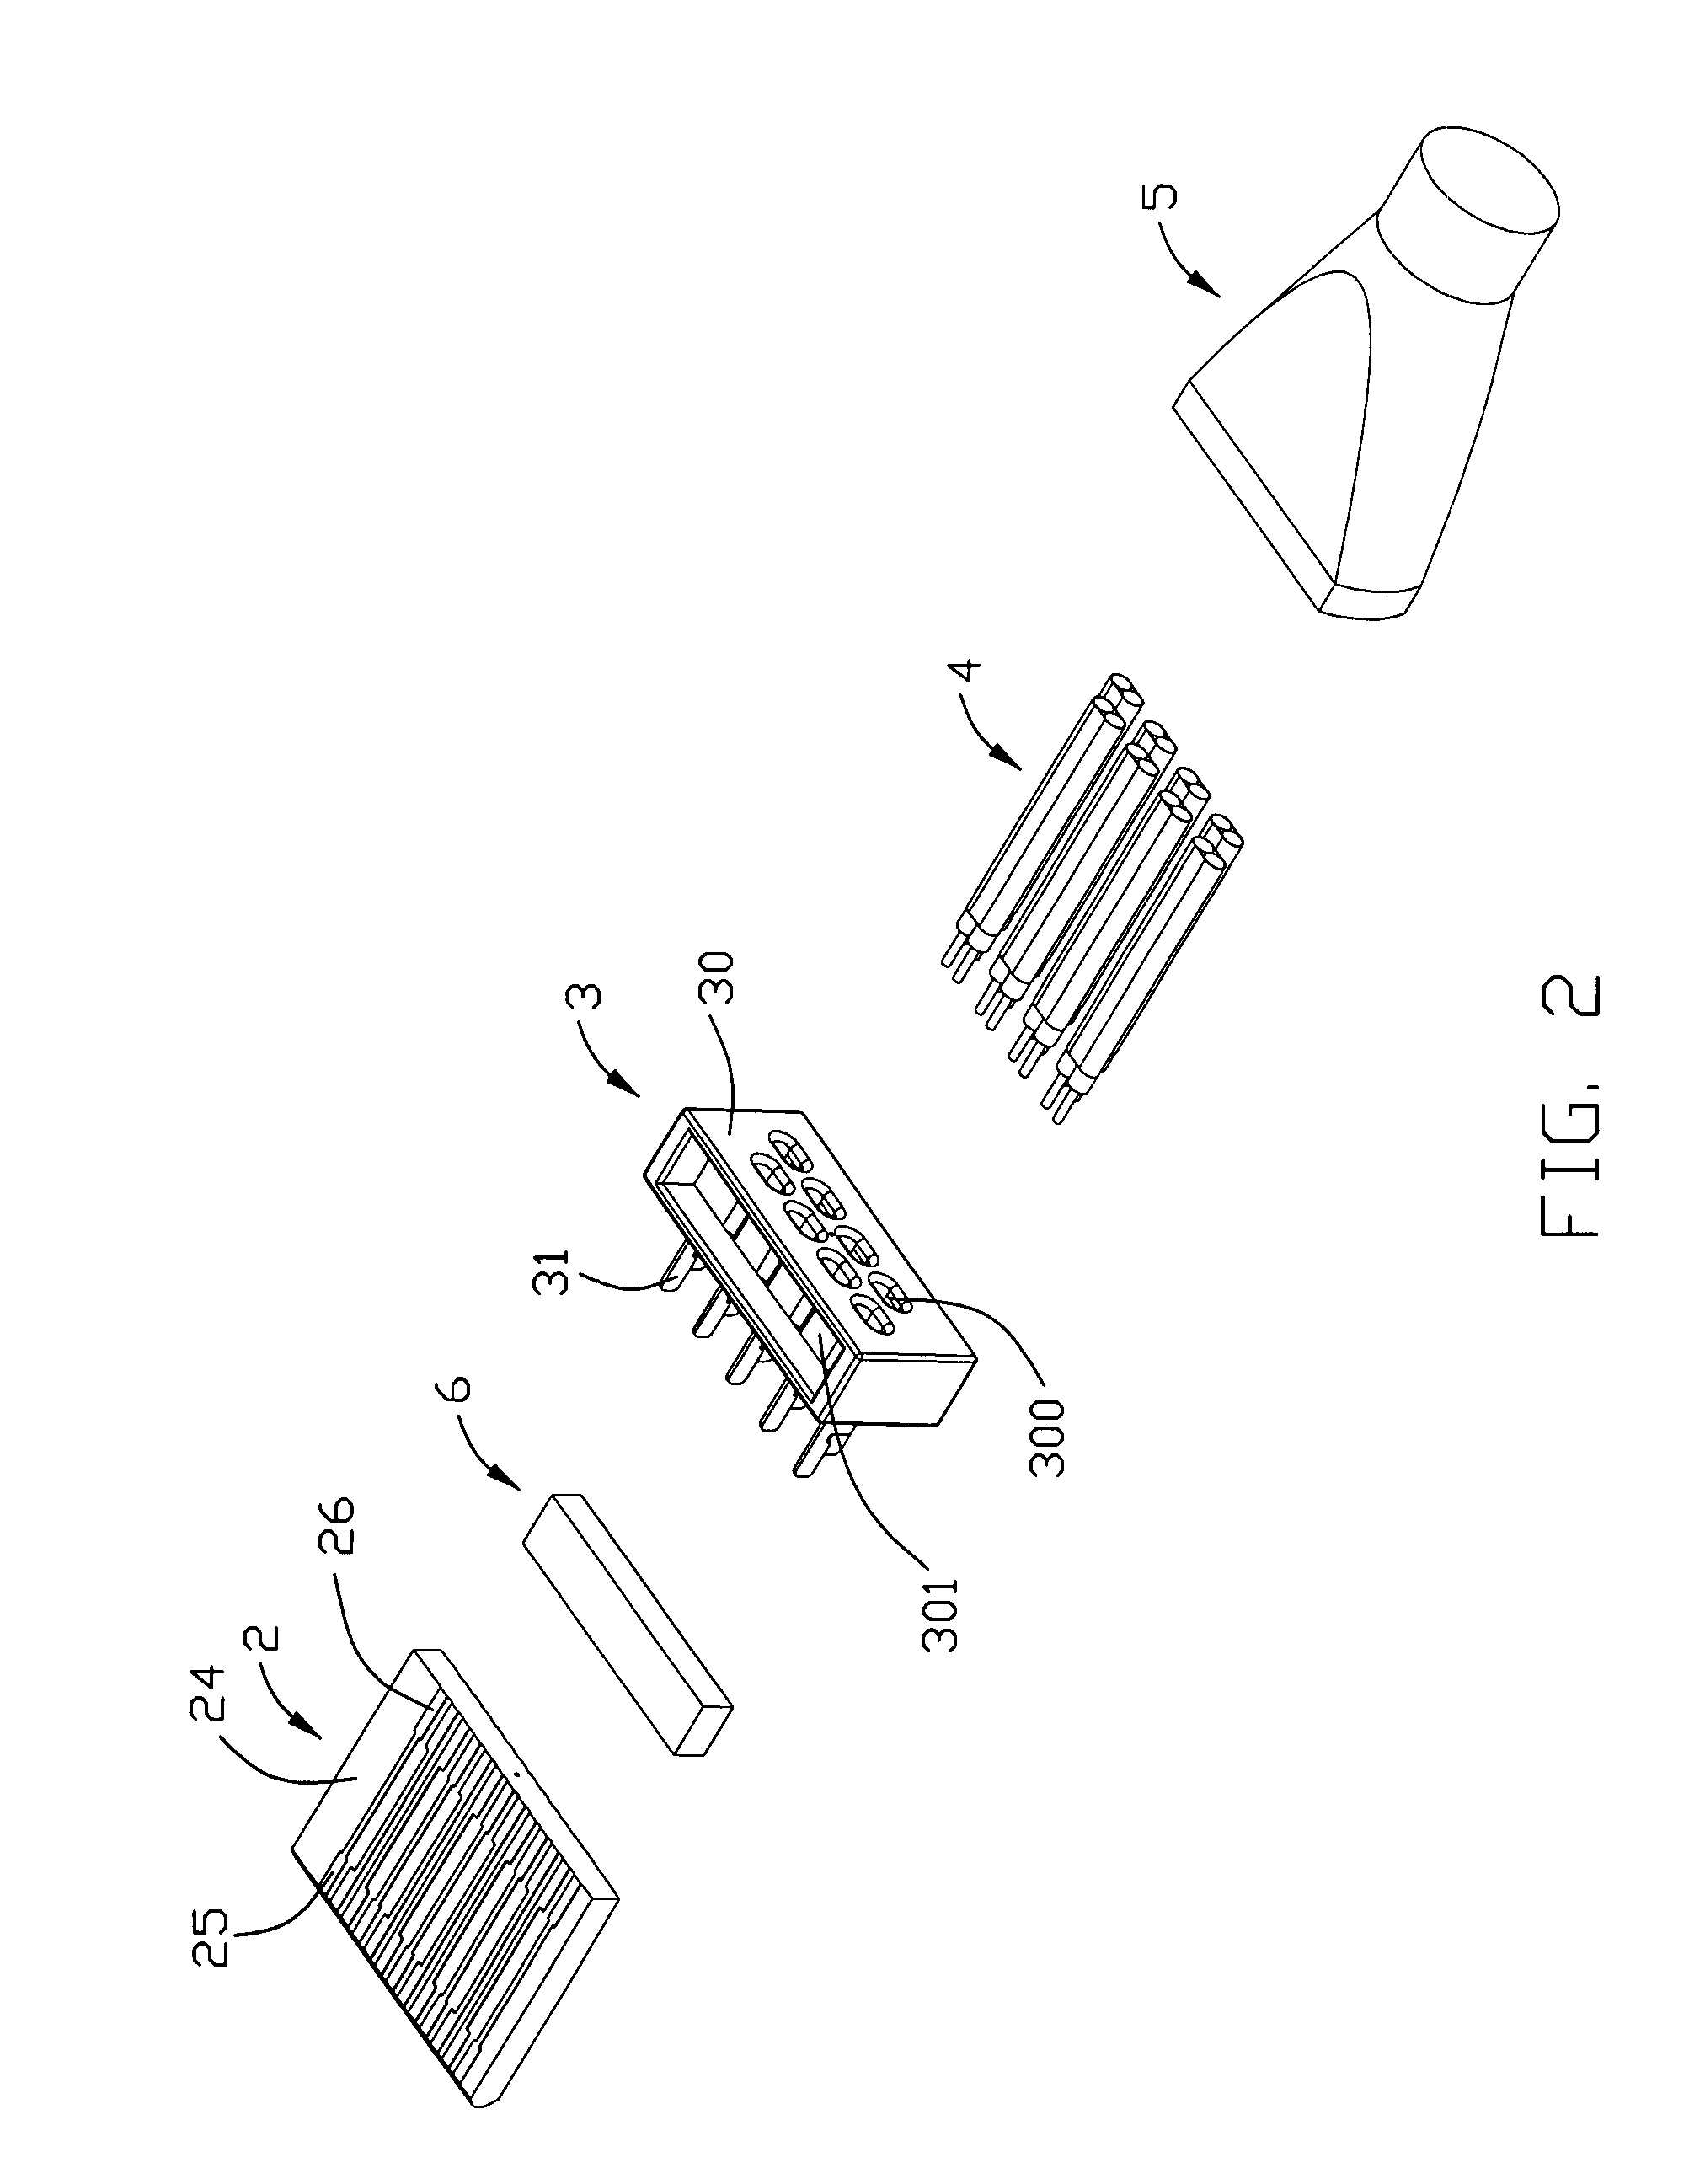 Cable connector assembly with improved wire organizer